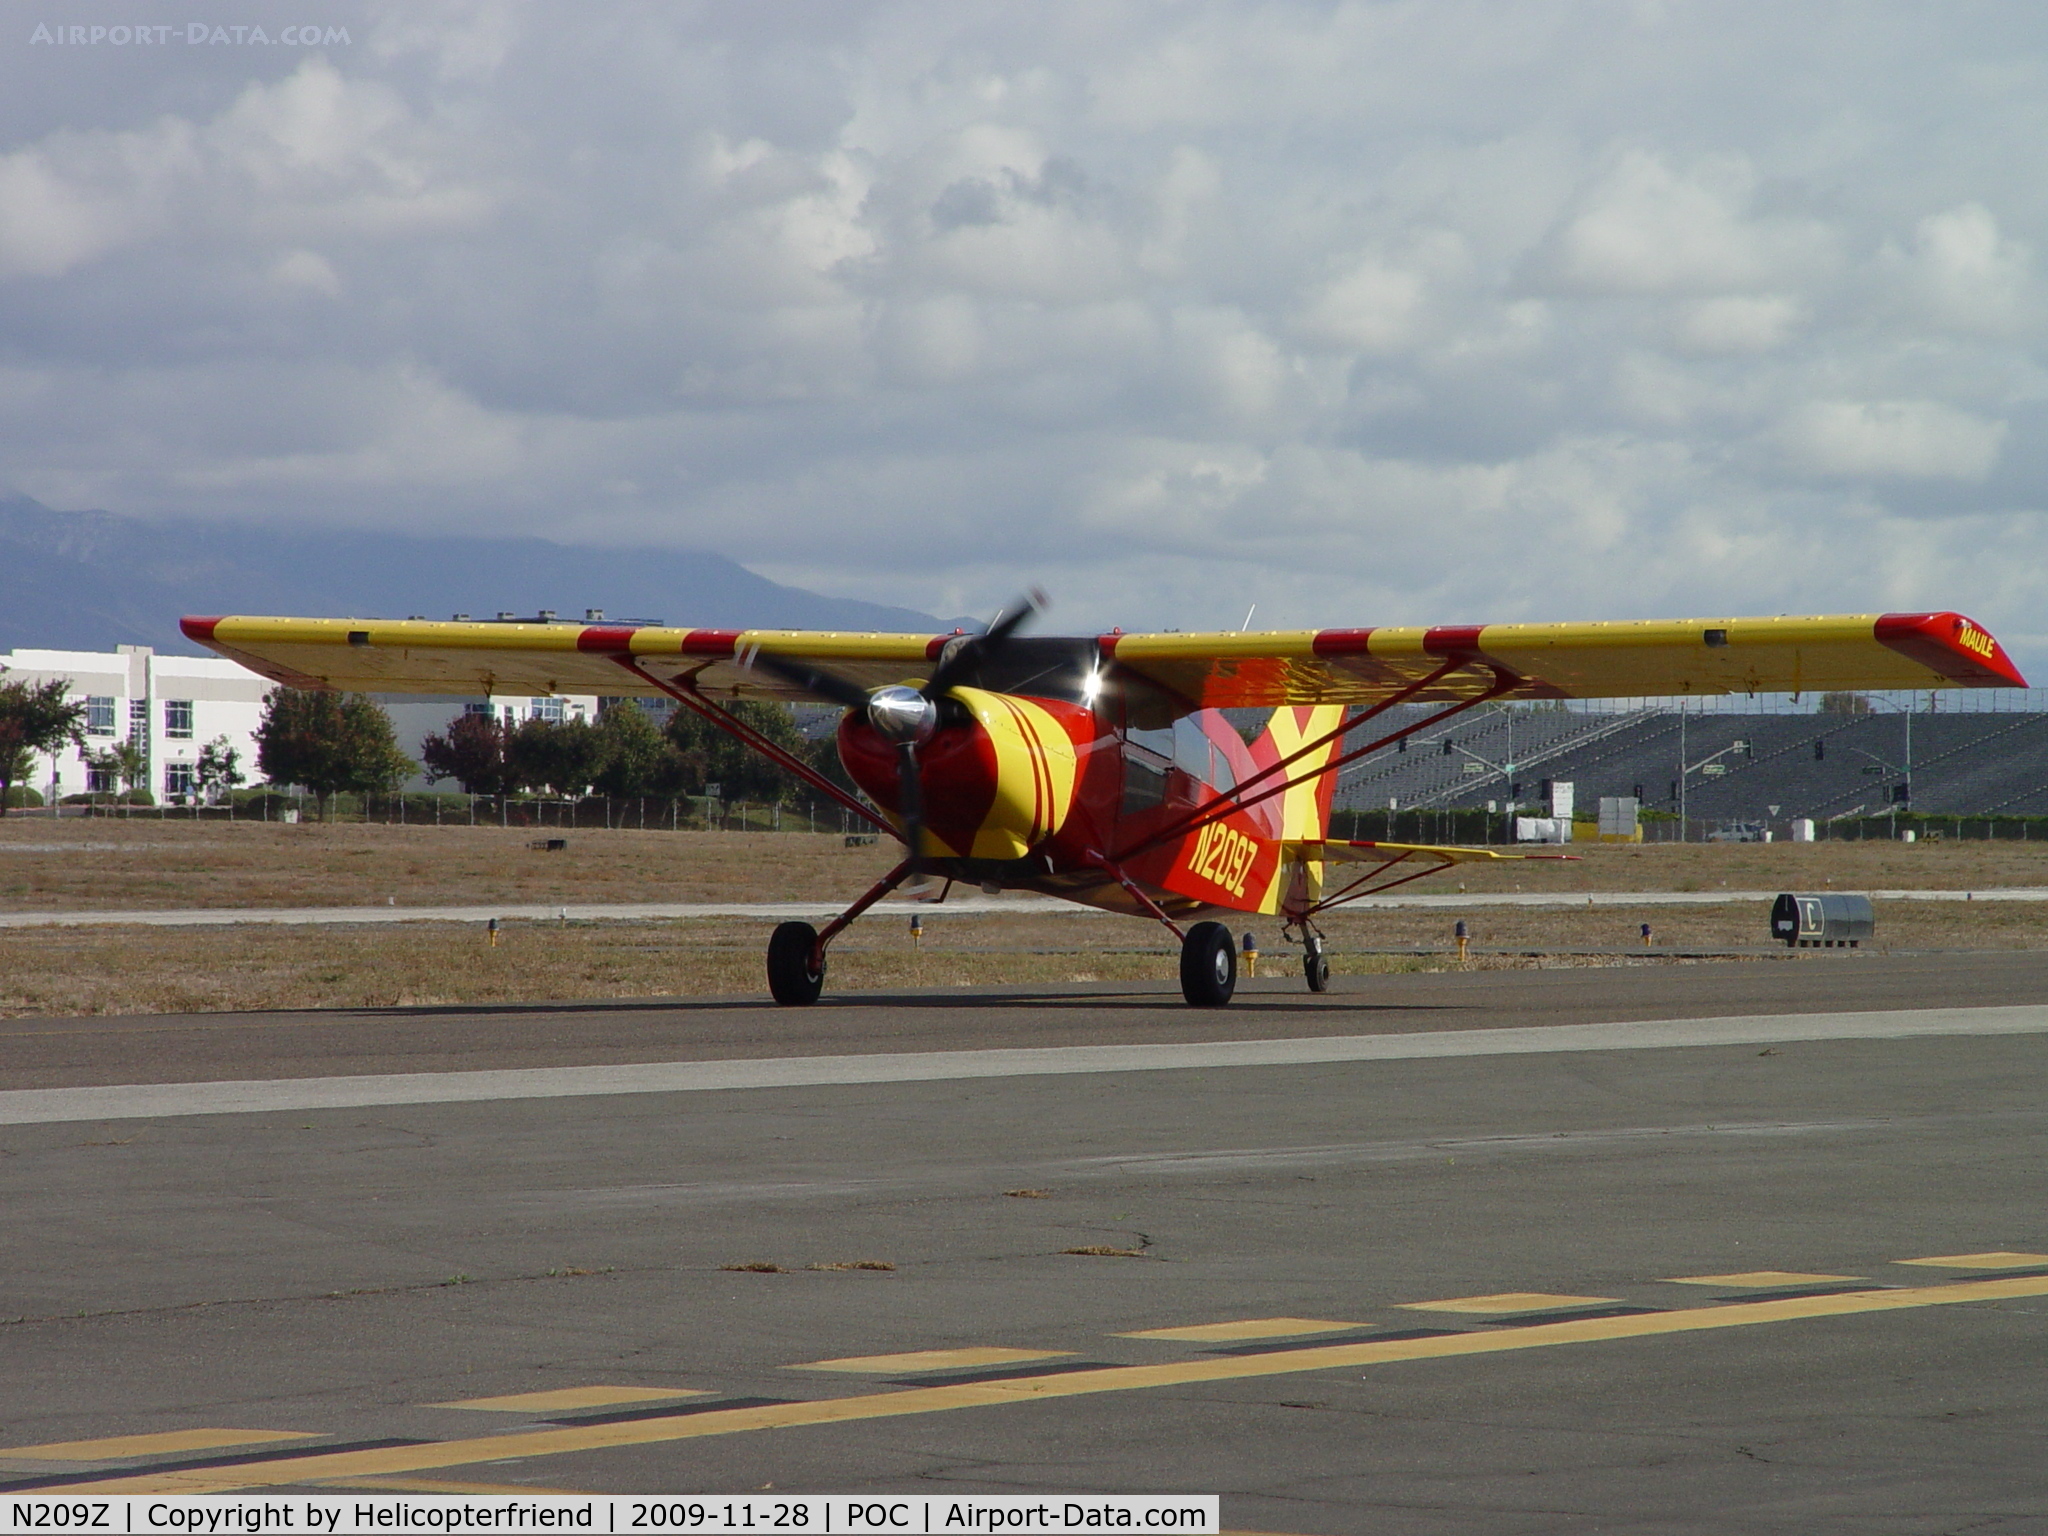 N209Z, 1999 Maule M-7-235C Orion C/N 25028C, Taxiing to fuel pumps